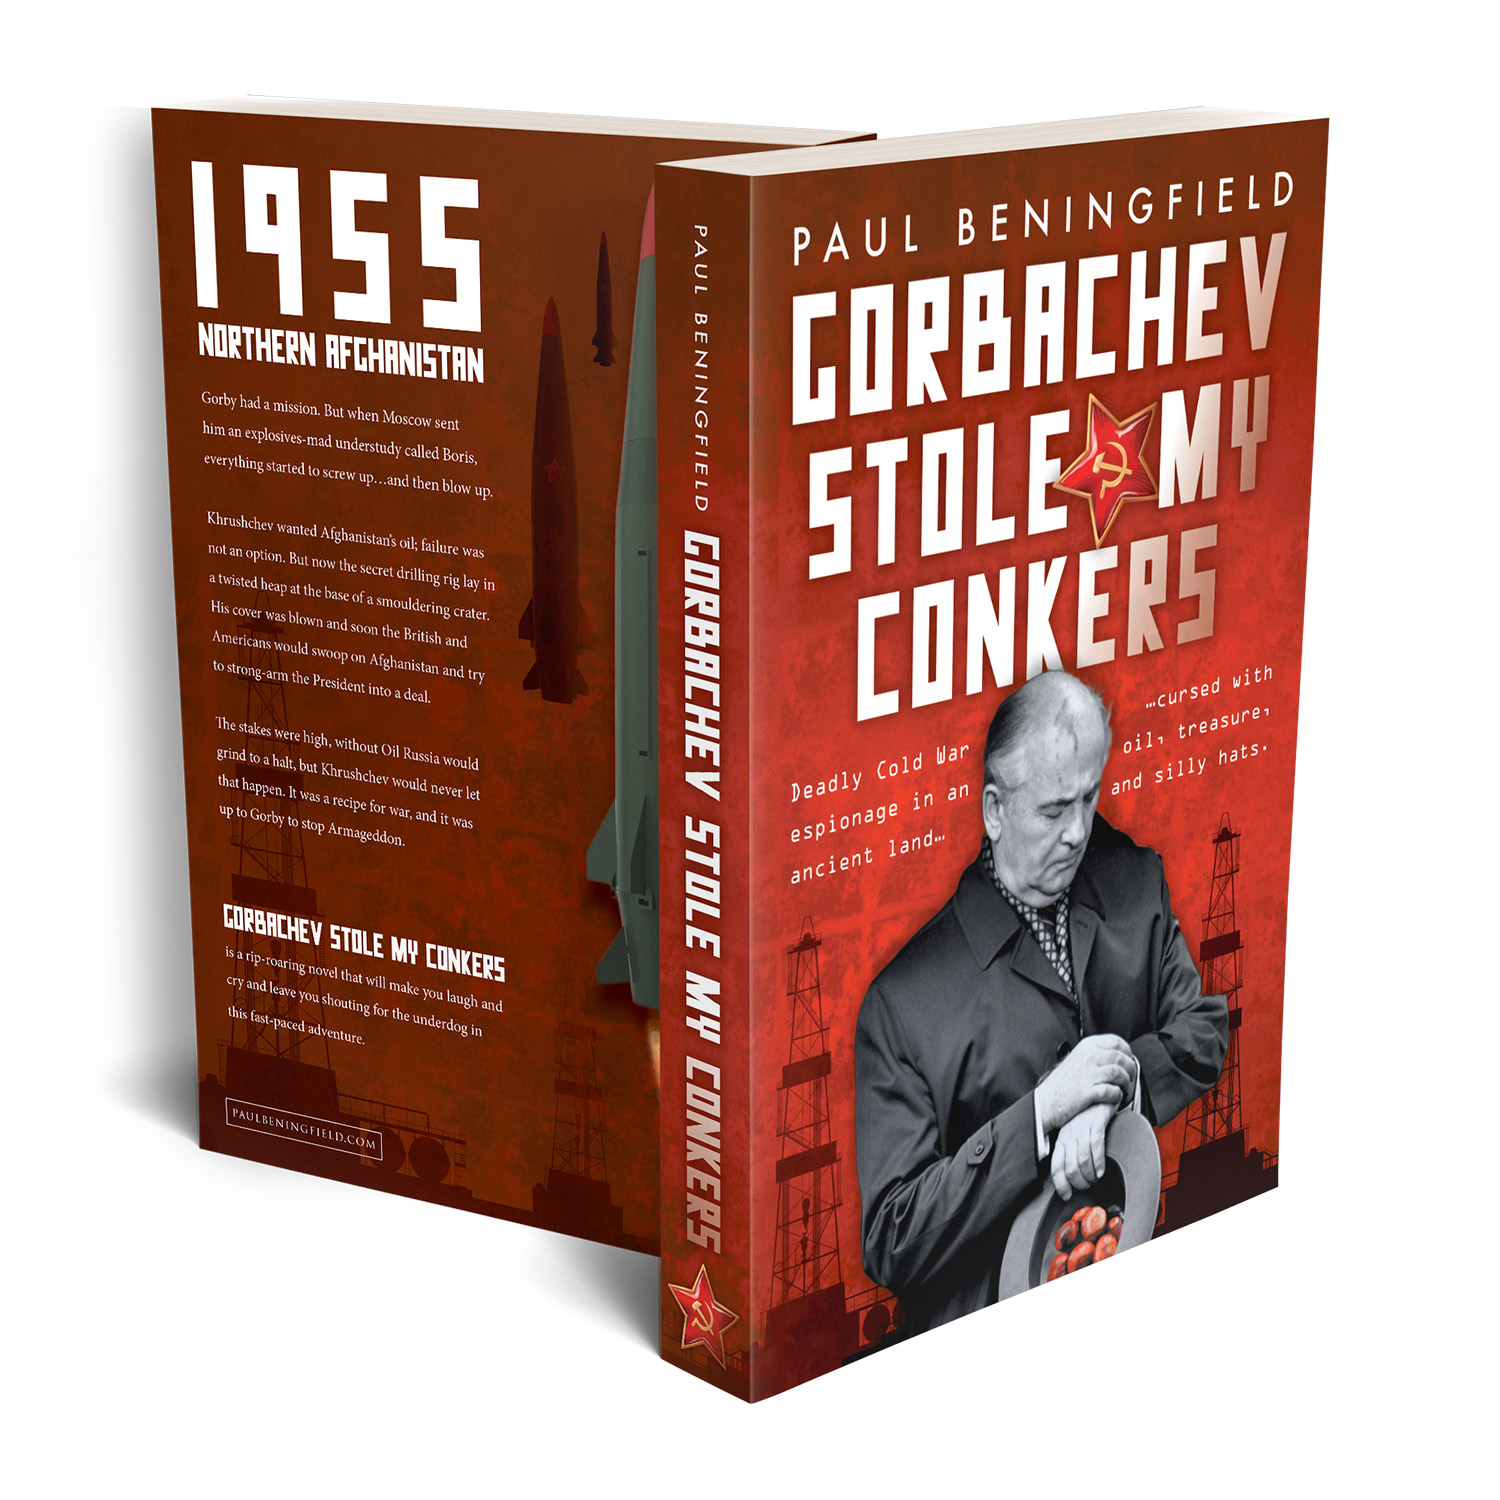 'Gorbachev Stole My Conkers' is sweeping scabrous satire on Cold War shenanigans. The author is Paul Beningfield. The cover design and interior formatting are by Mark Thomas of coverness.com. To find out more about my book design services, please visit www.coverness.com.